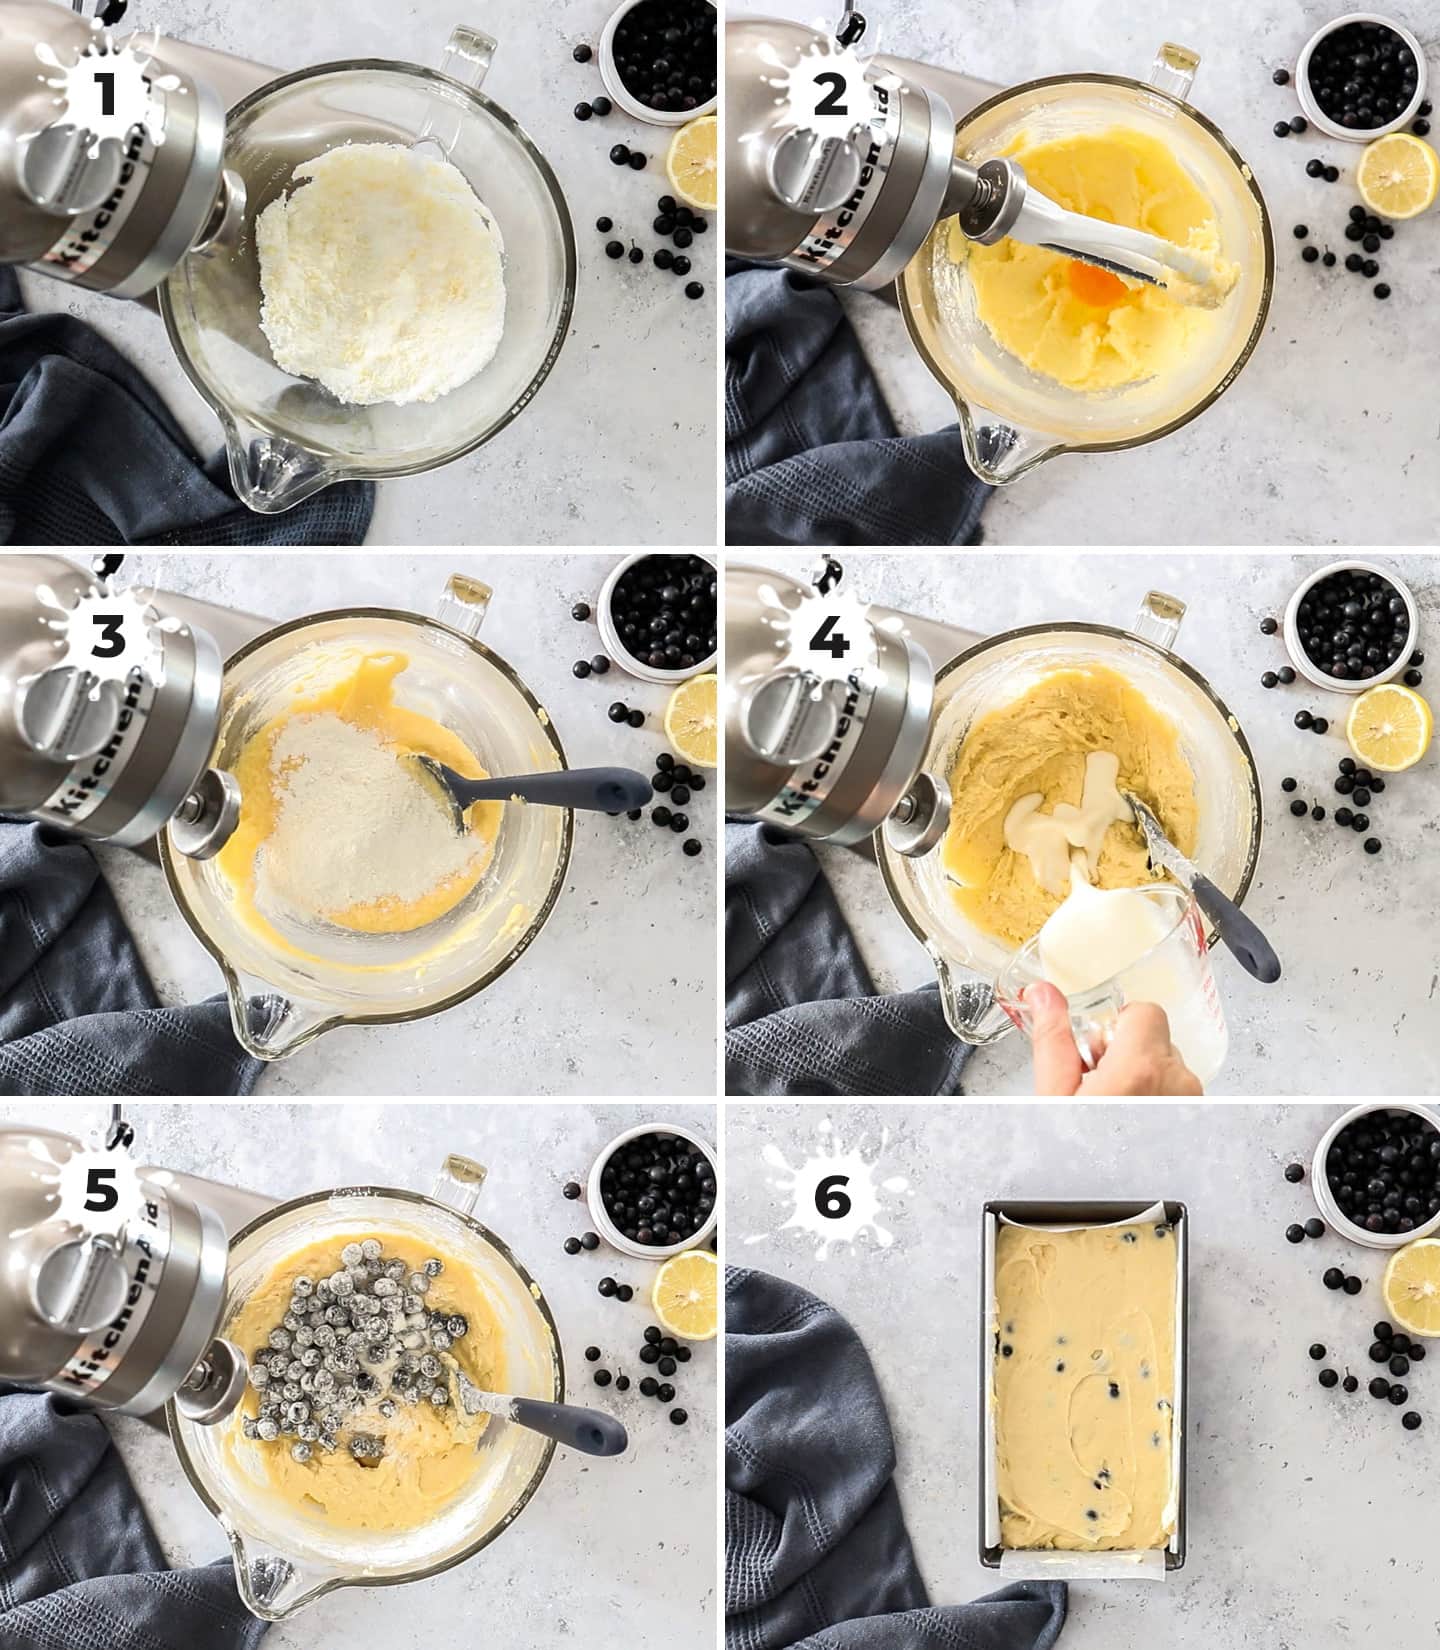 A collage of 6 images showing how to make blueberry lemon yoghurt cake.